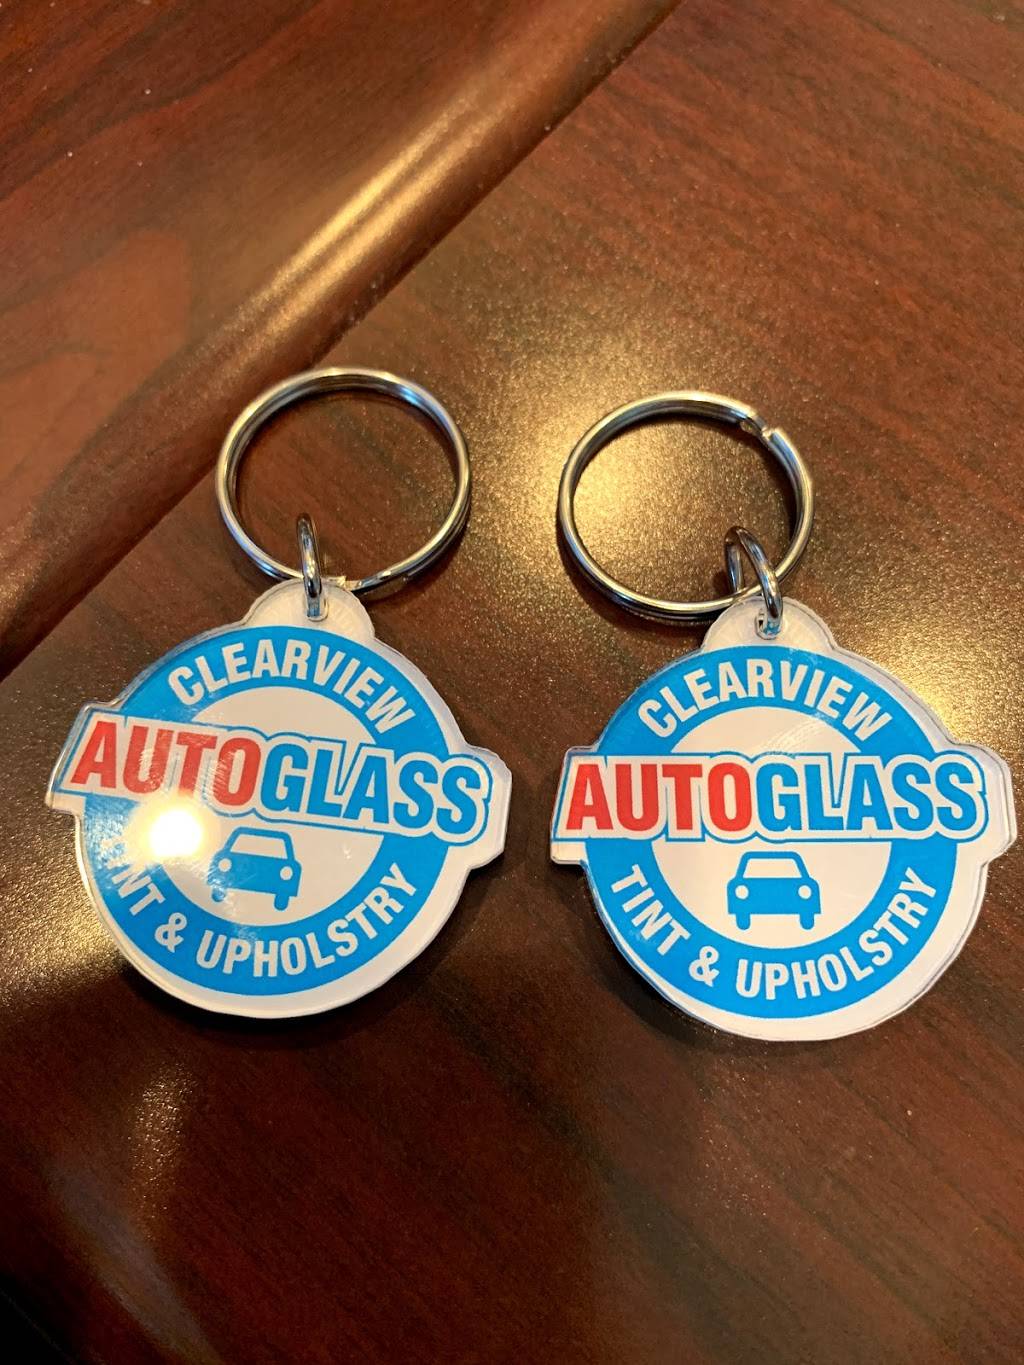 Clearview Auto Glass & Tint | 105 N Langley Rd, Glen Burnie, MD 21060 | Phone: (410) 576-6860